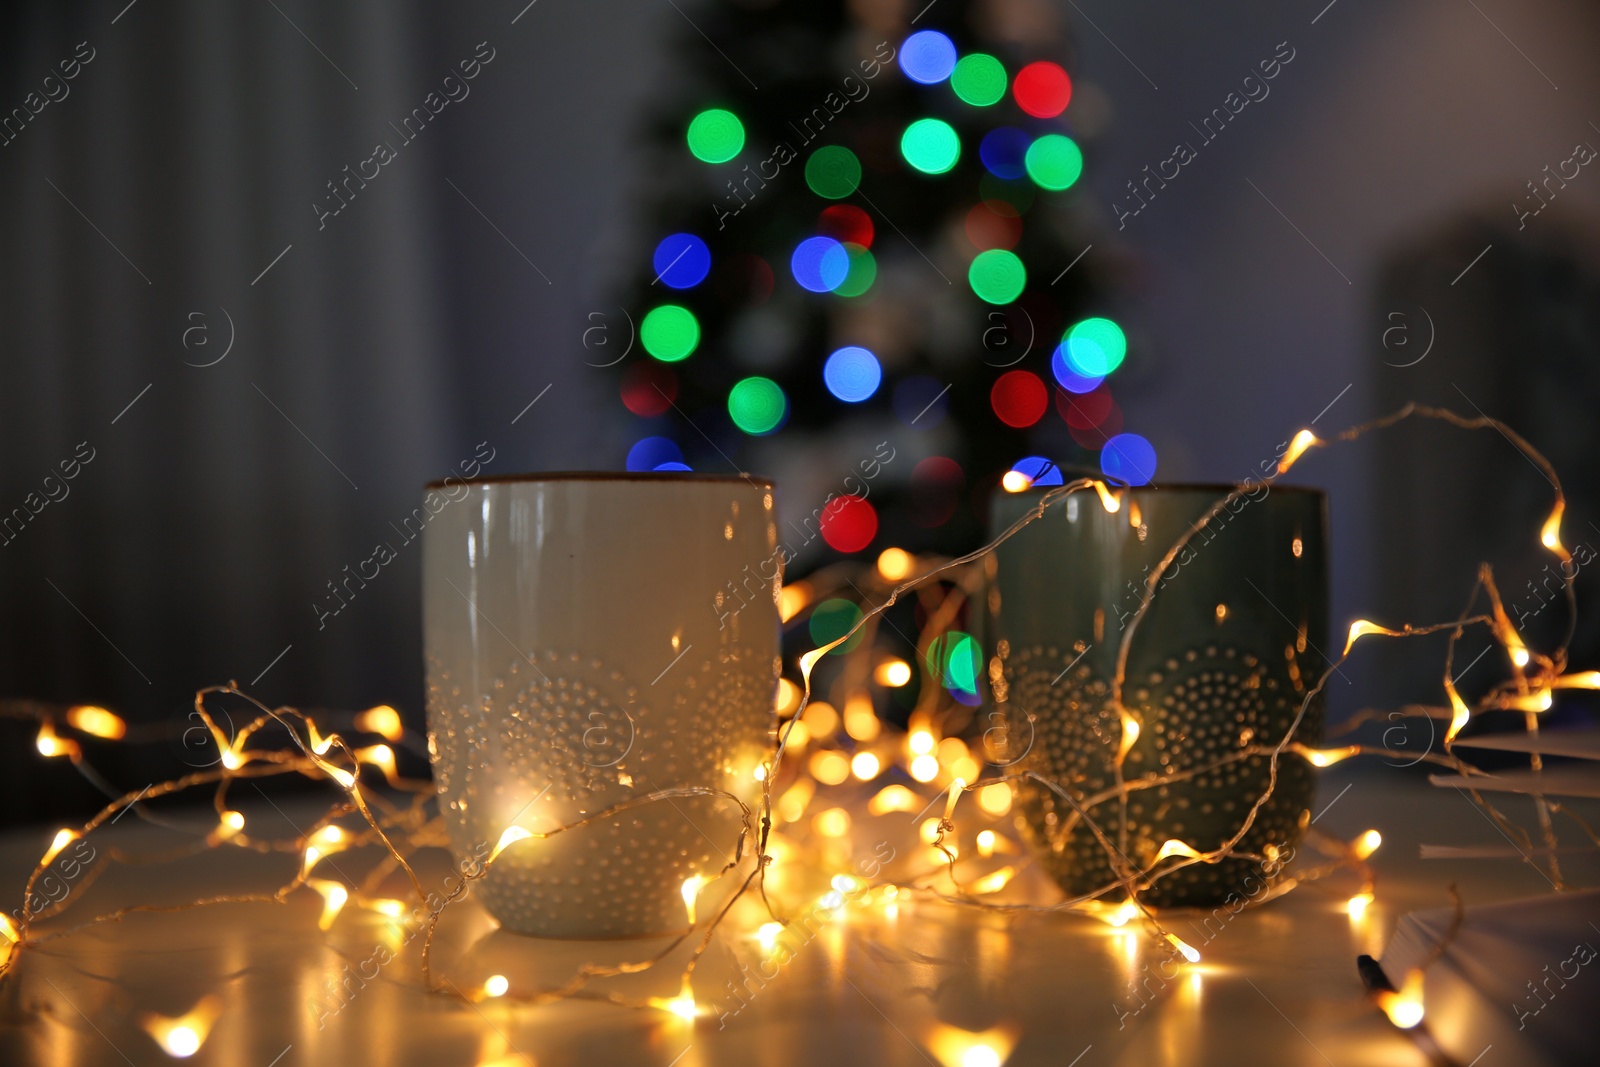 Photo of Cups, fairy lights and blurred Christmas tree on background